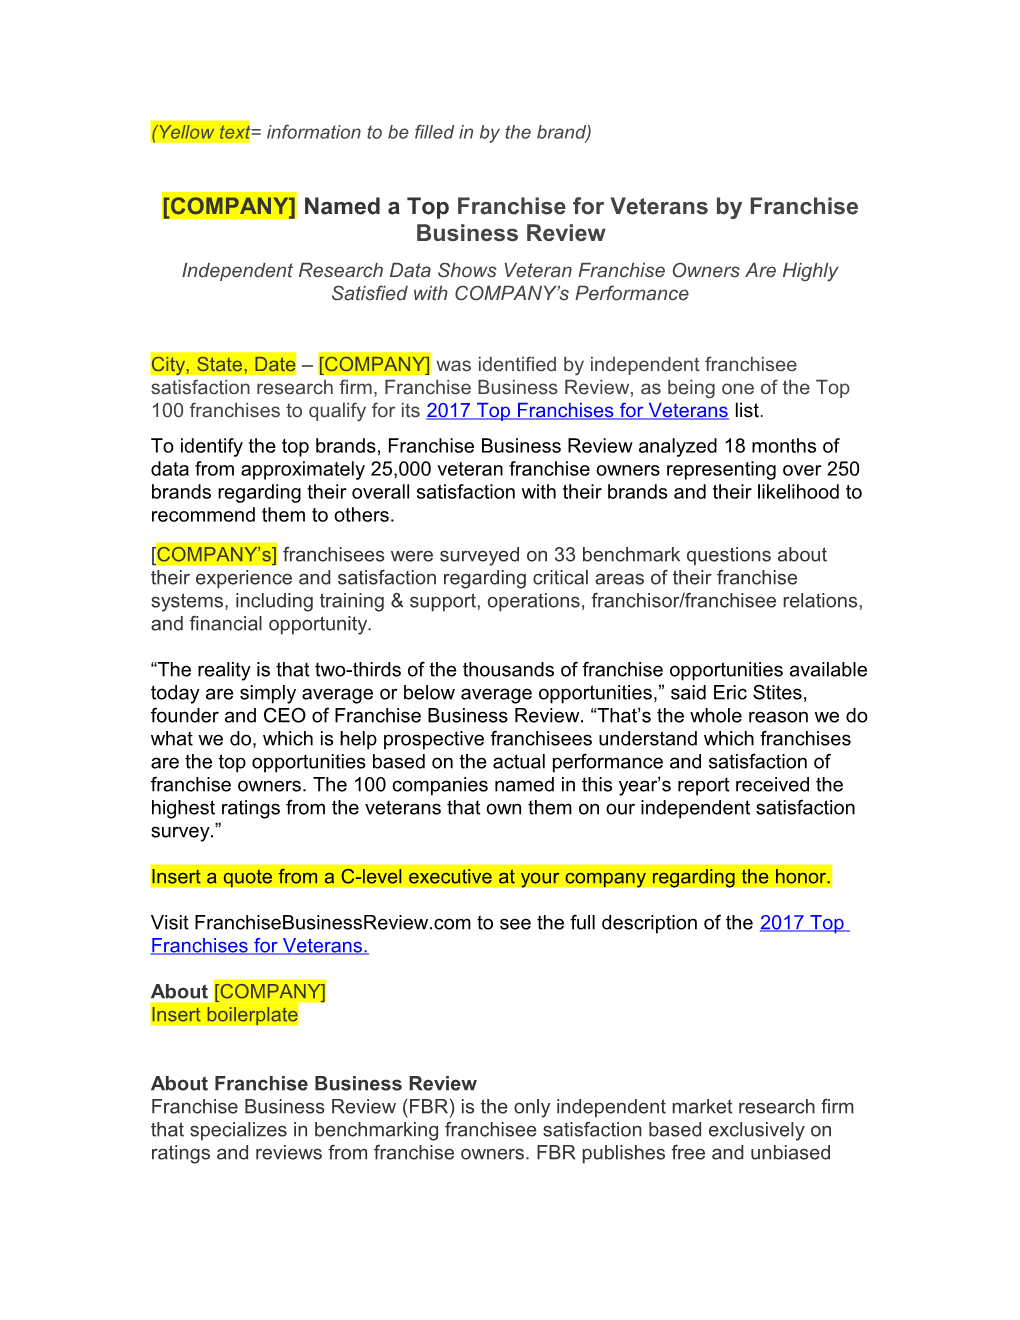 COMPANY Named a Top Franchise for Veterans Byfranchise Business Review